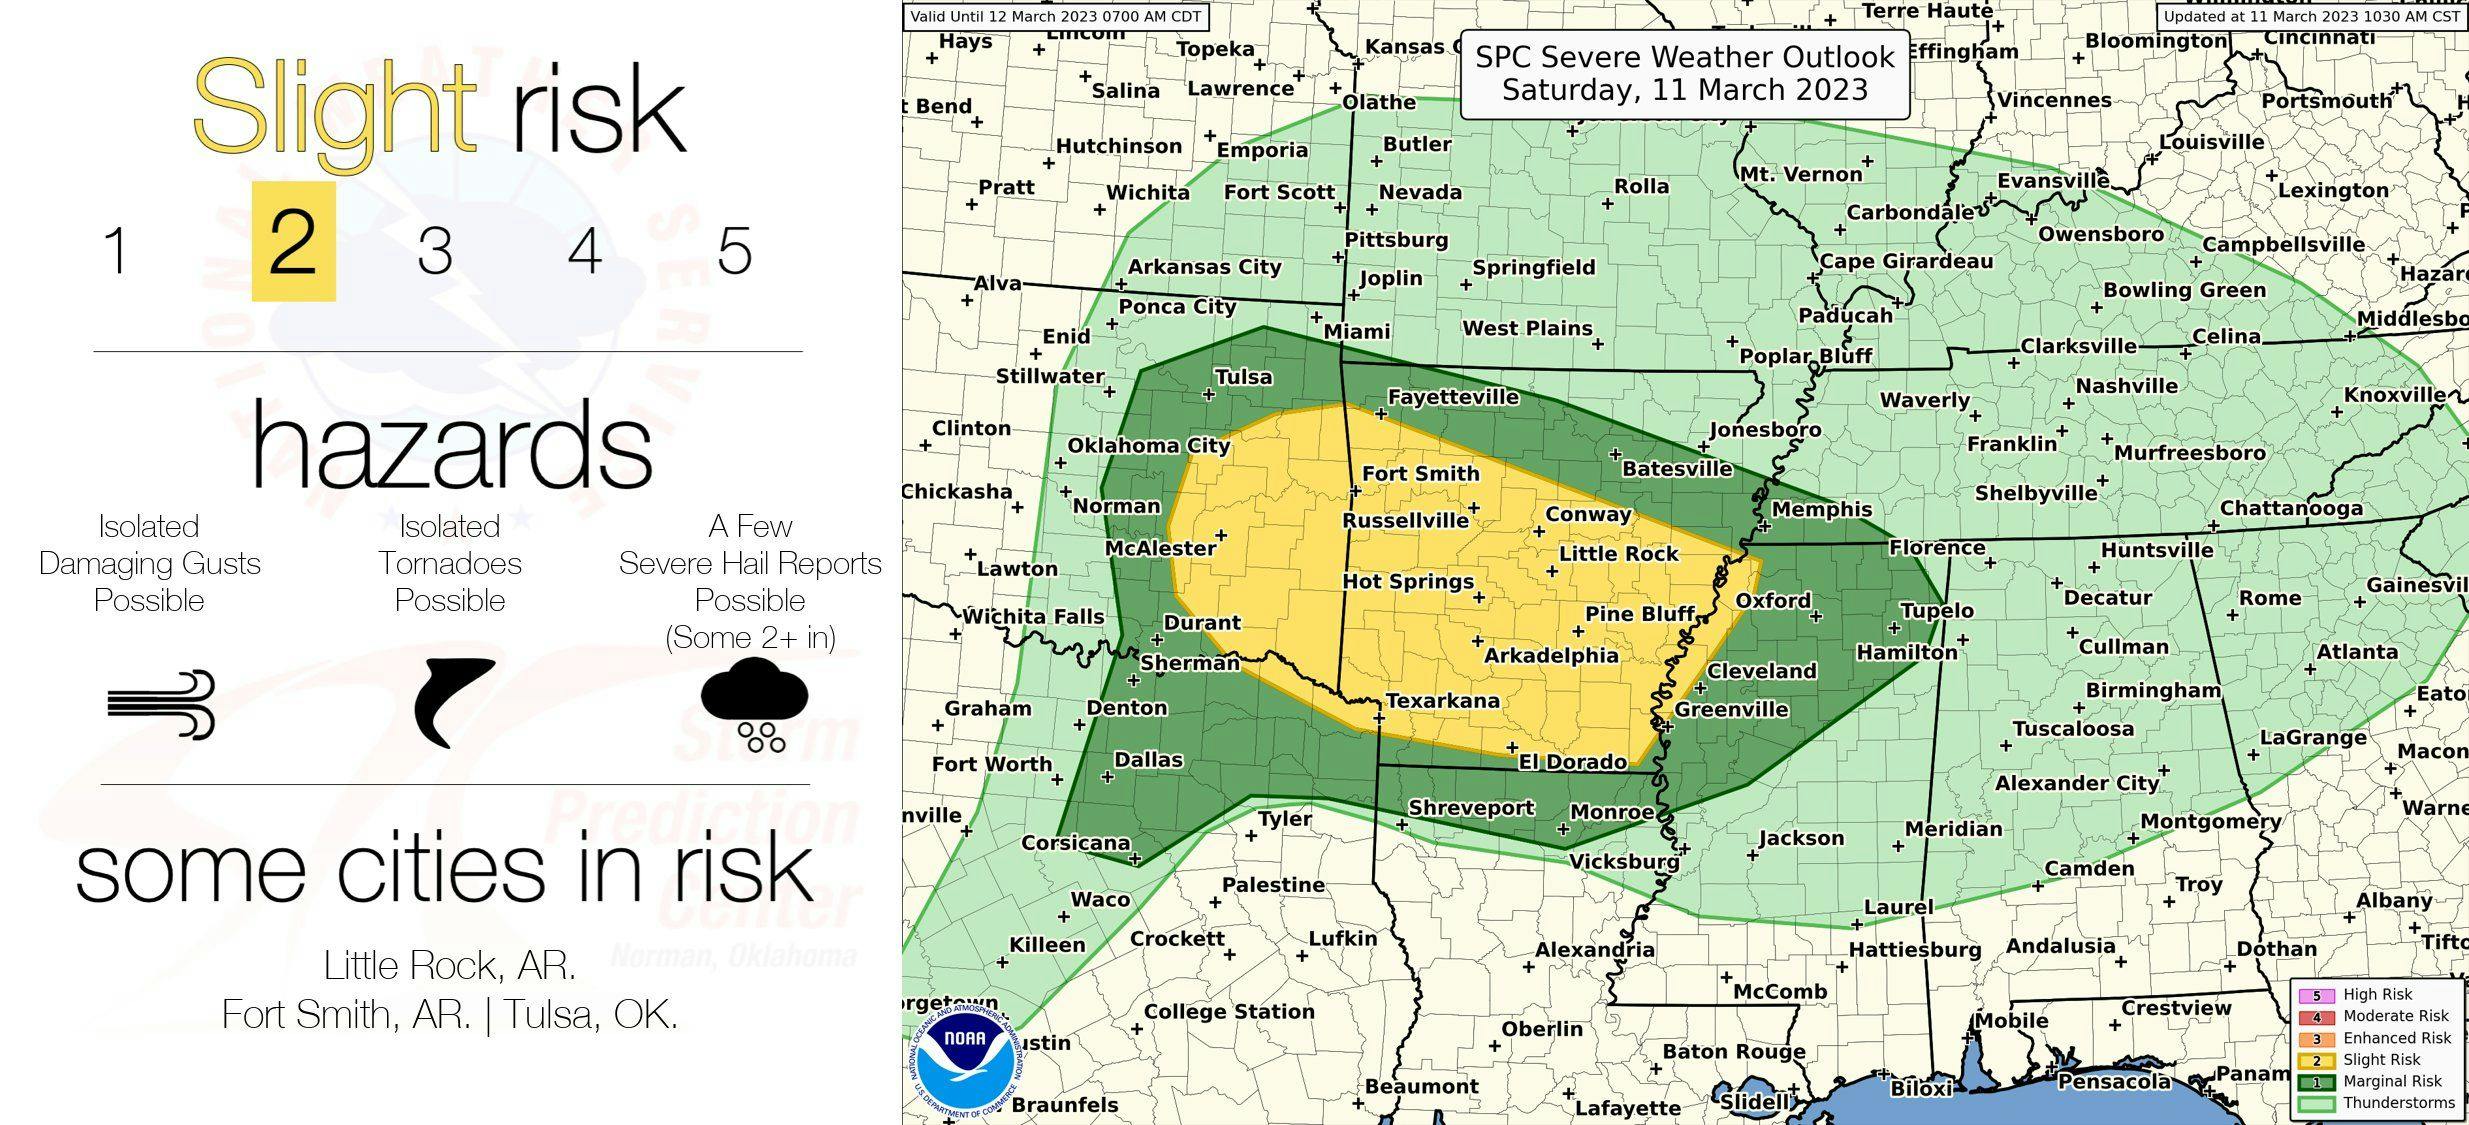 Saturday afternoon/evening severe risk